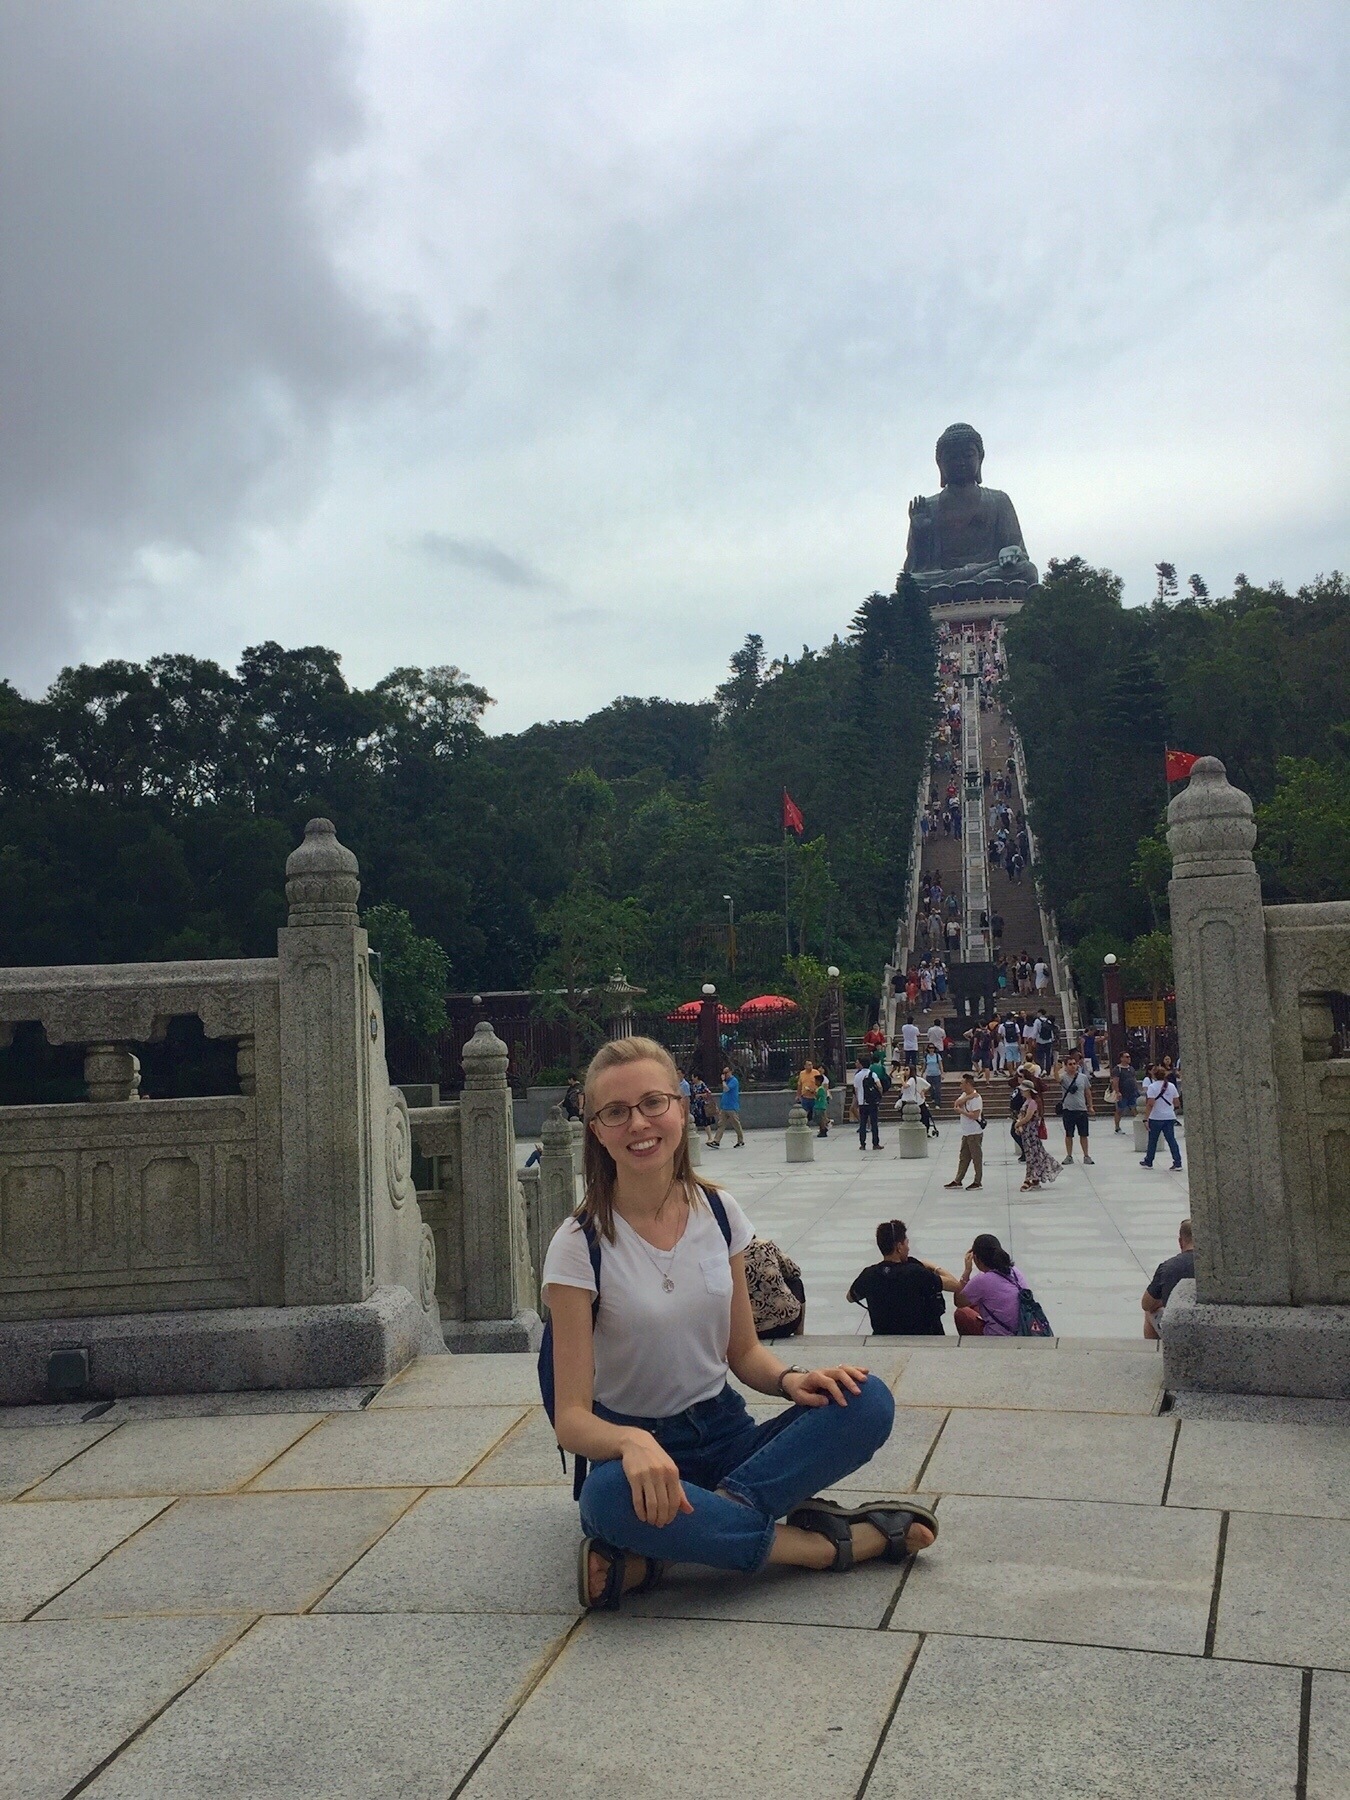 Anastasiia Kryzhanivska seated on the ground, with the "Big Buddha" in the background